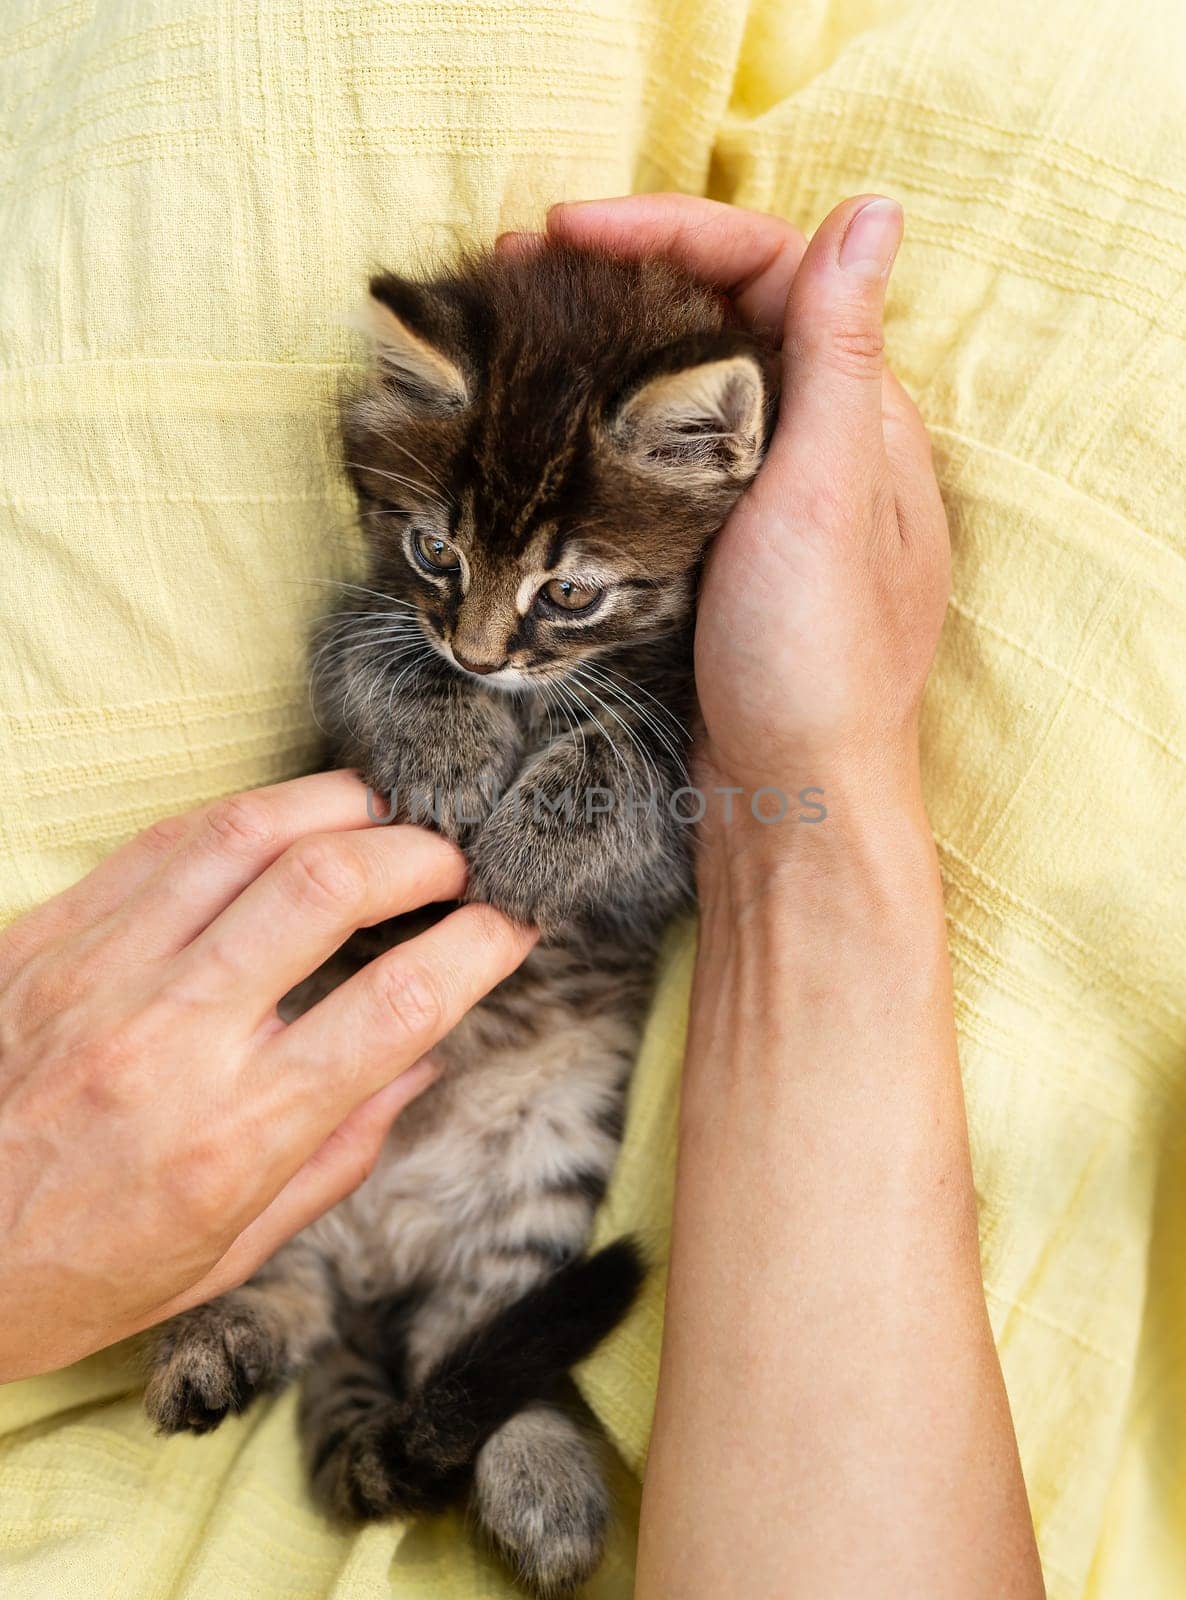 A small kitten with brown striped fur is being held and petted by a person. The kitten s eyes and whiskers are visible